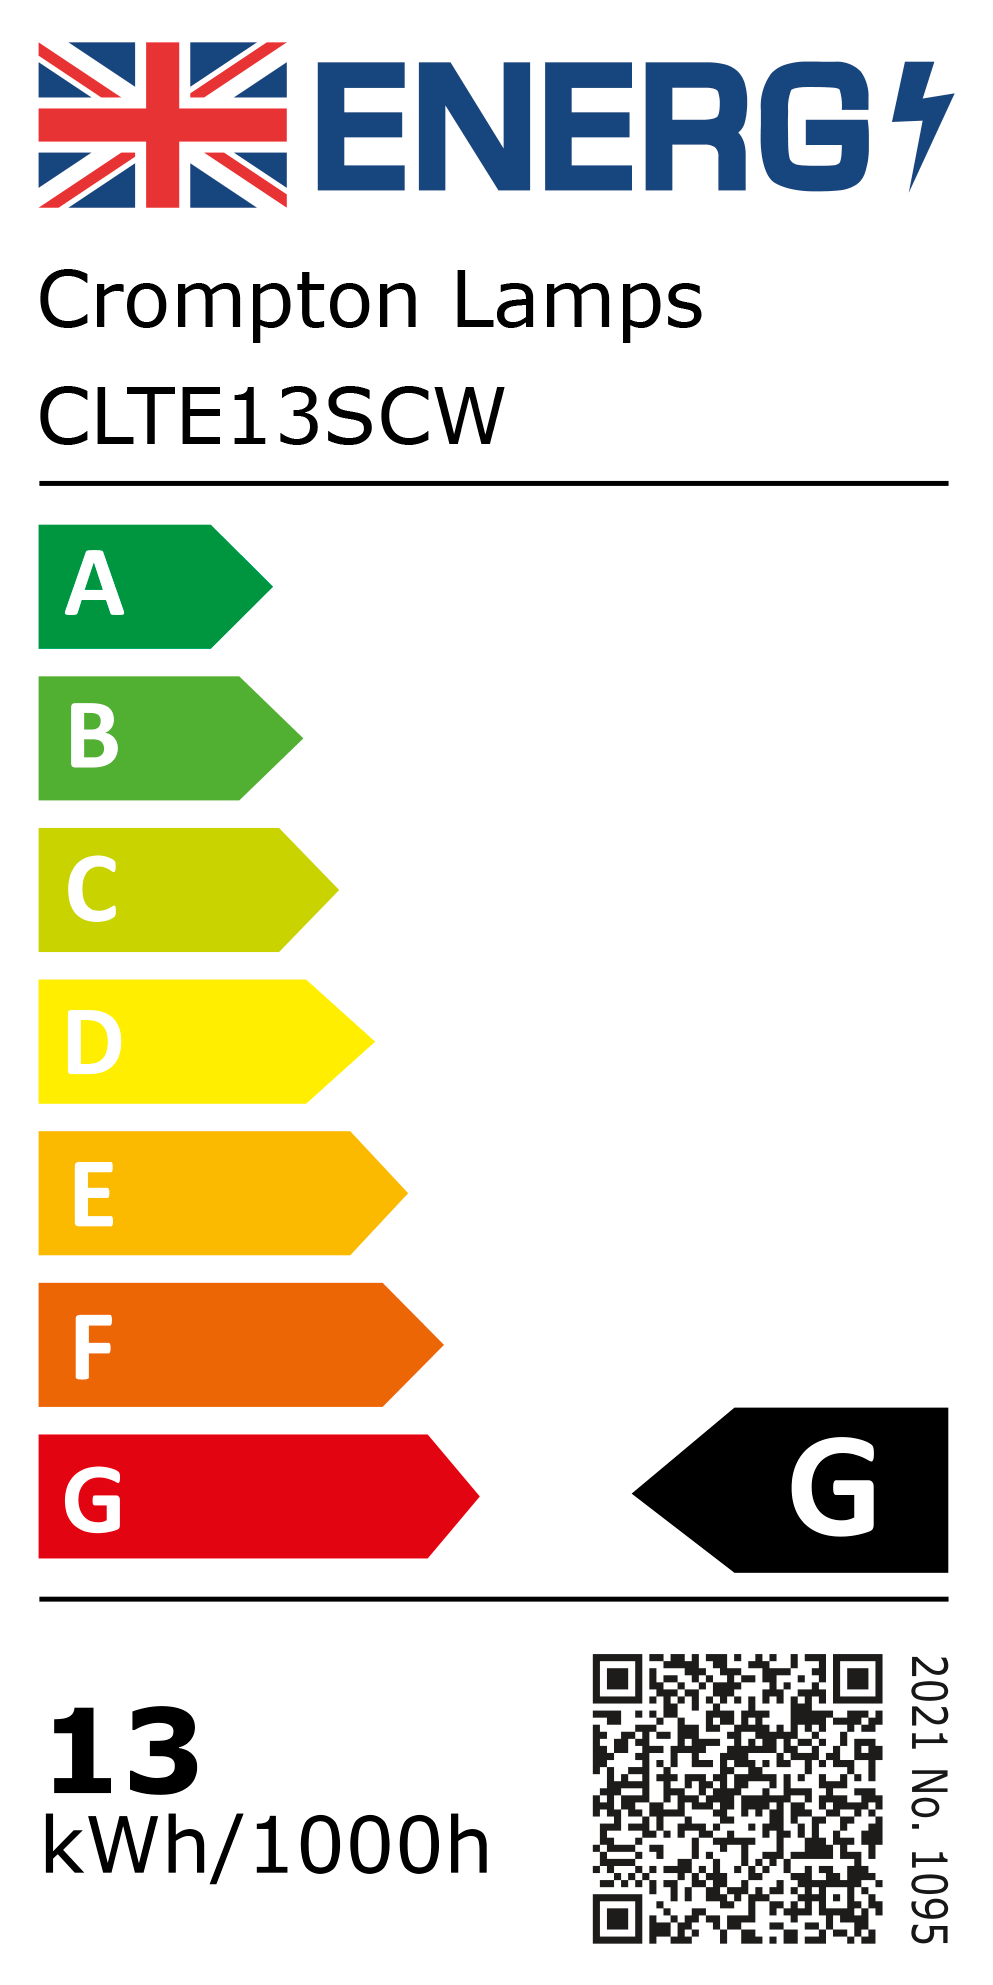 New 2021 Energy Rating Label: Stock Code CLTE13SCW